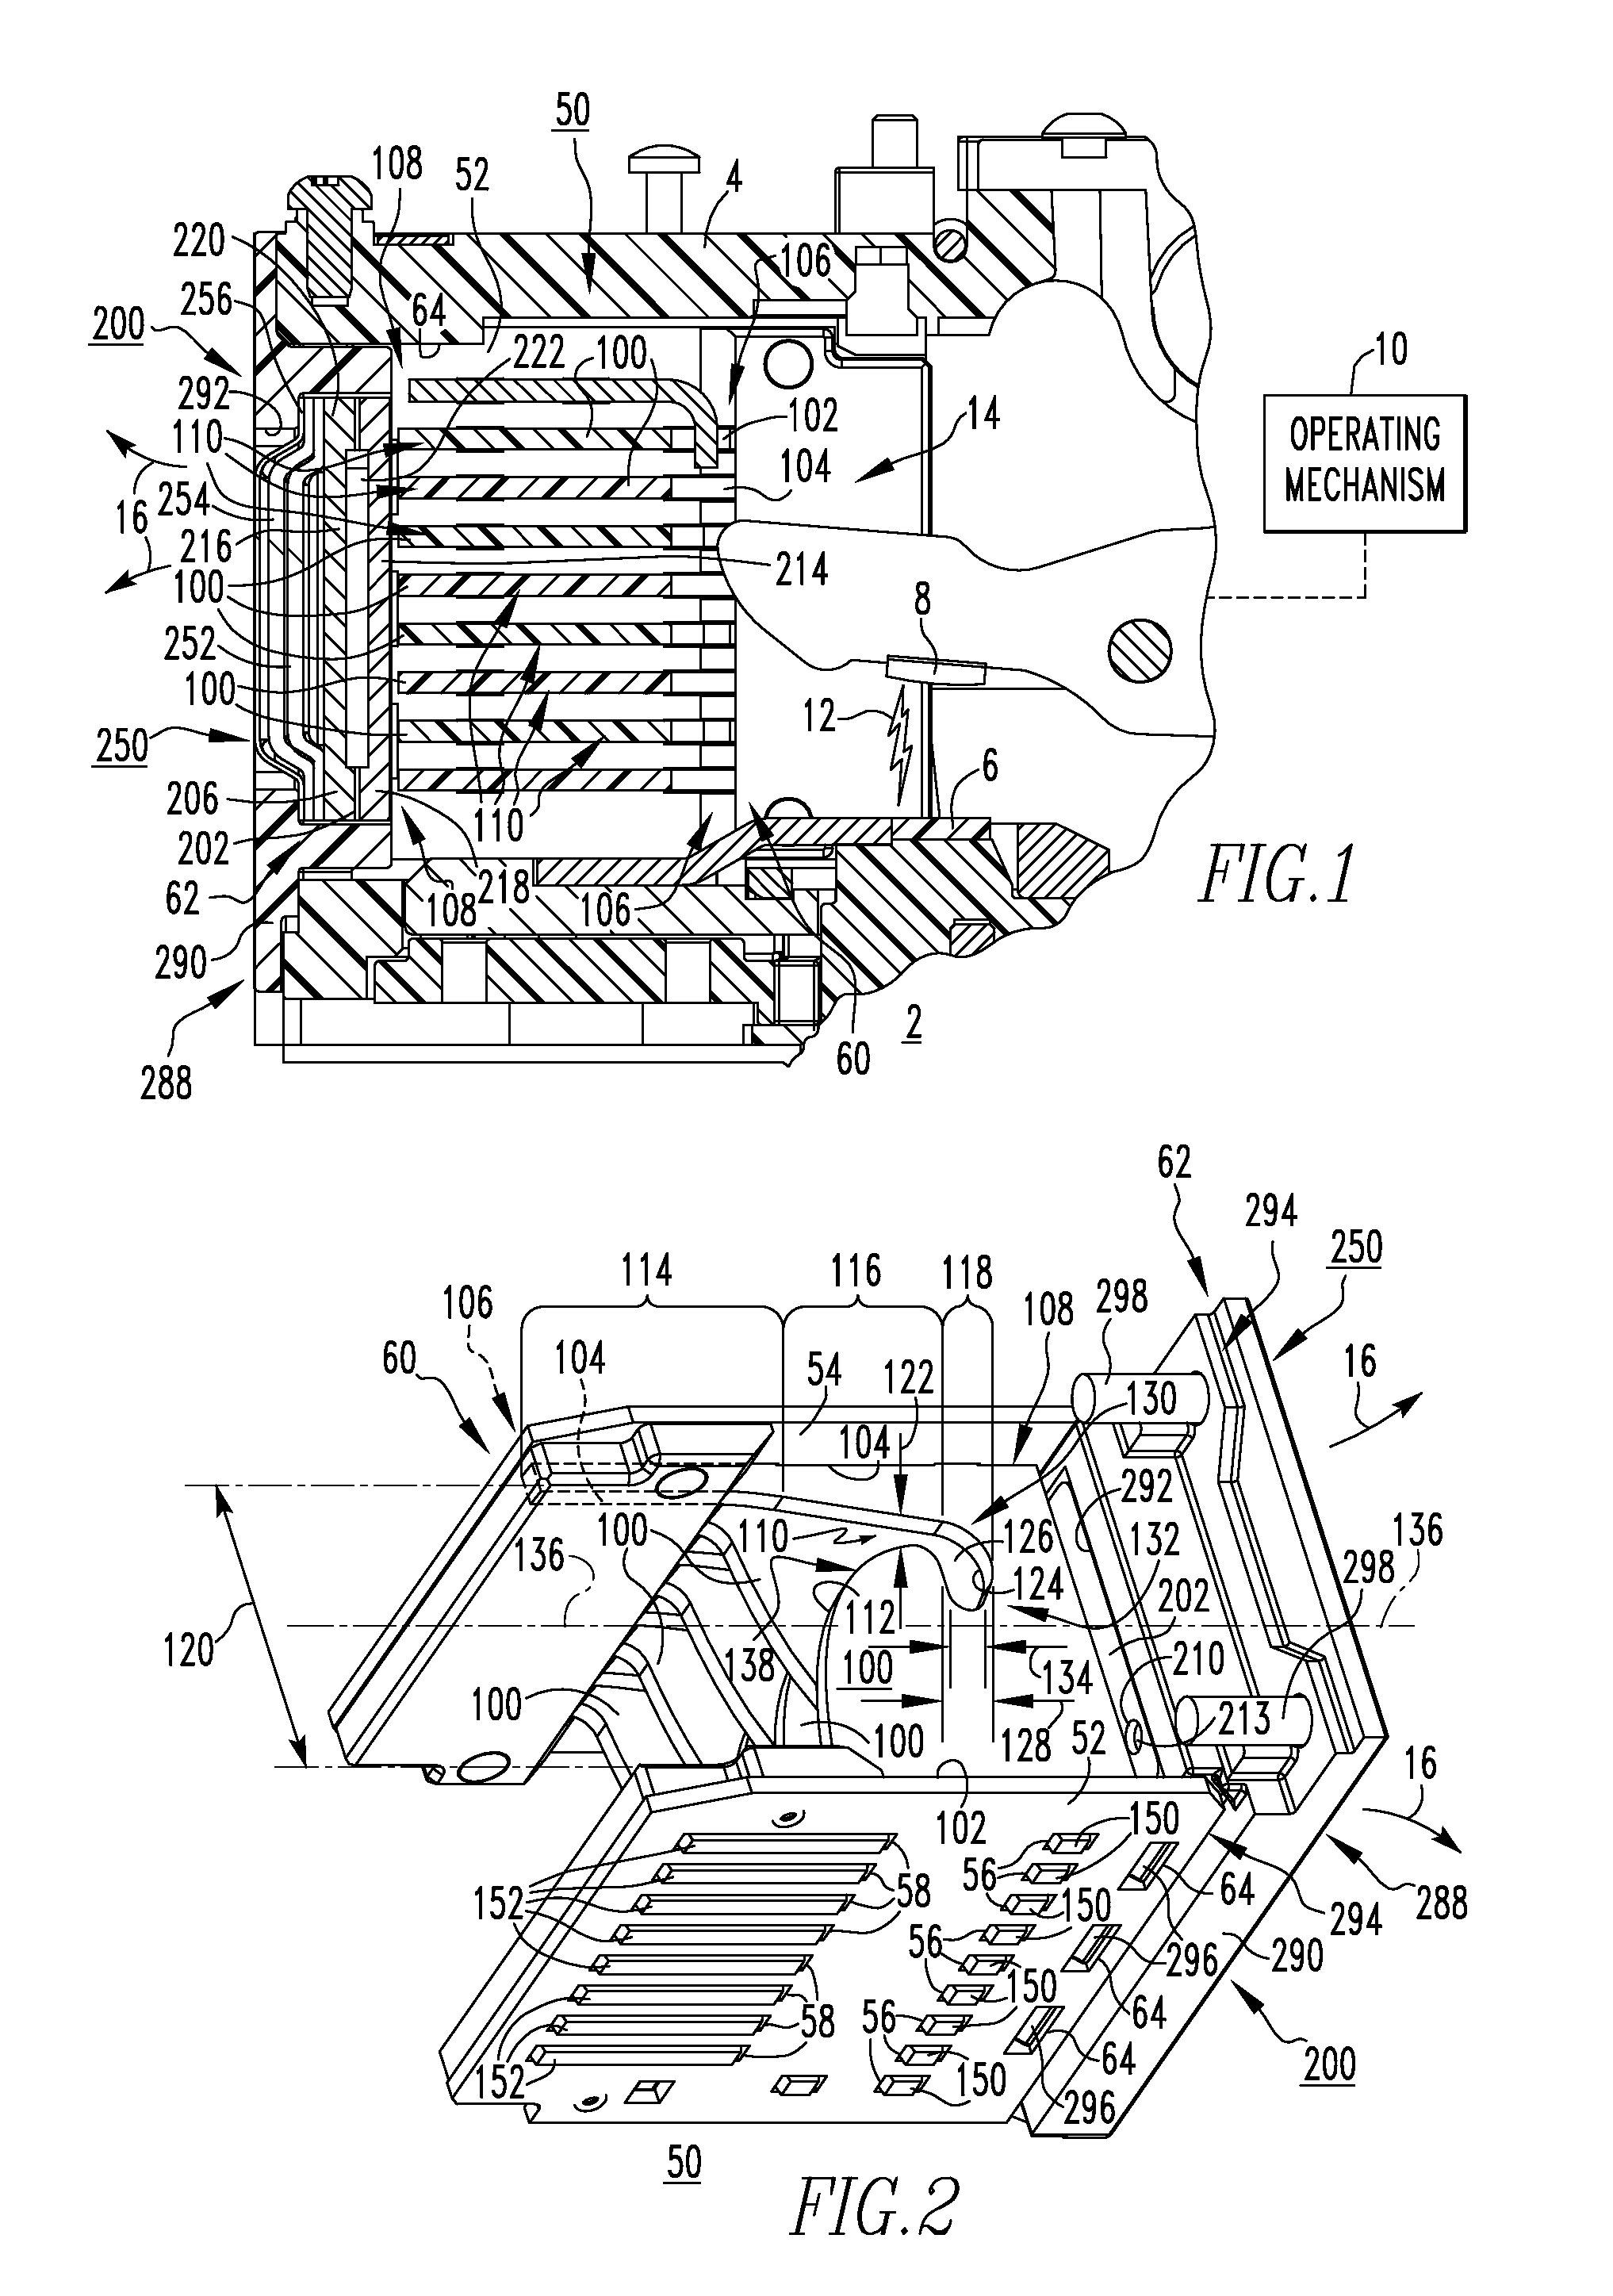 ARC baffle, and ARC chute assembly and electrical switching apparatus employing the same